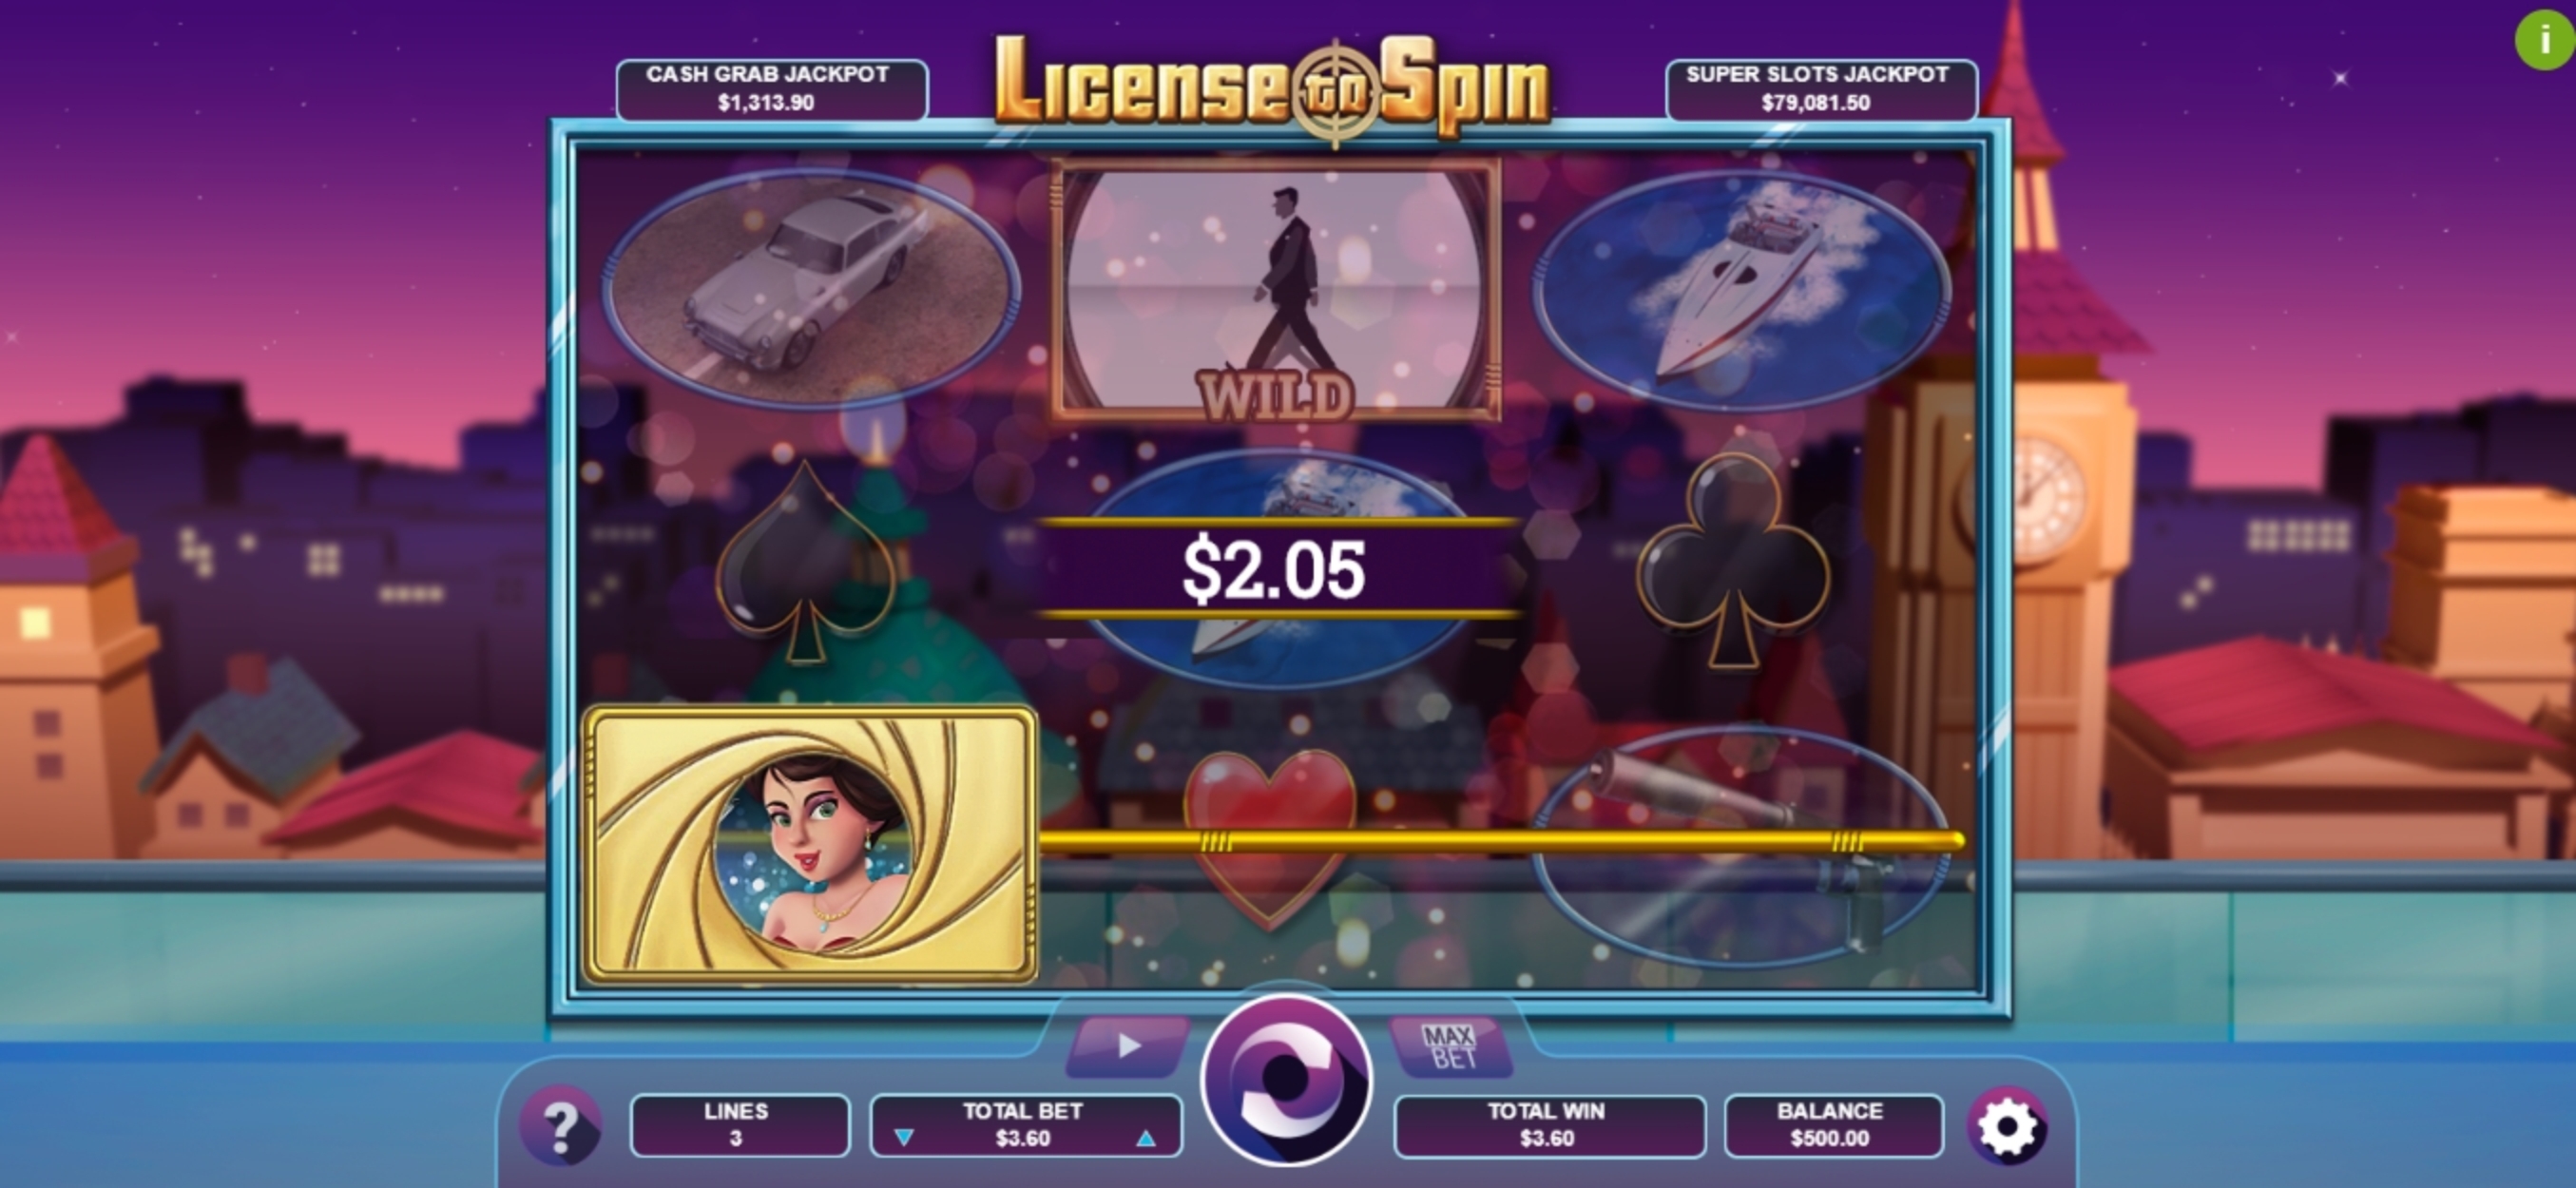 Win Money in License to Spin Free Slot Game by Arrows Edge